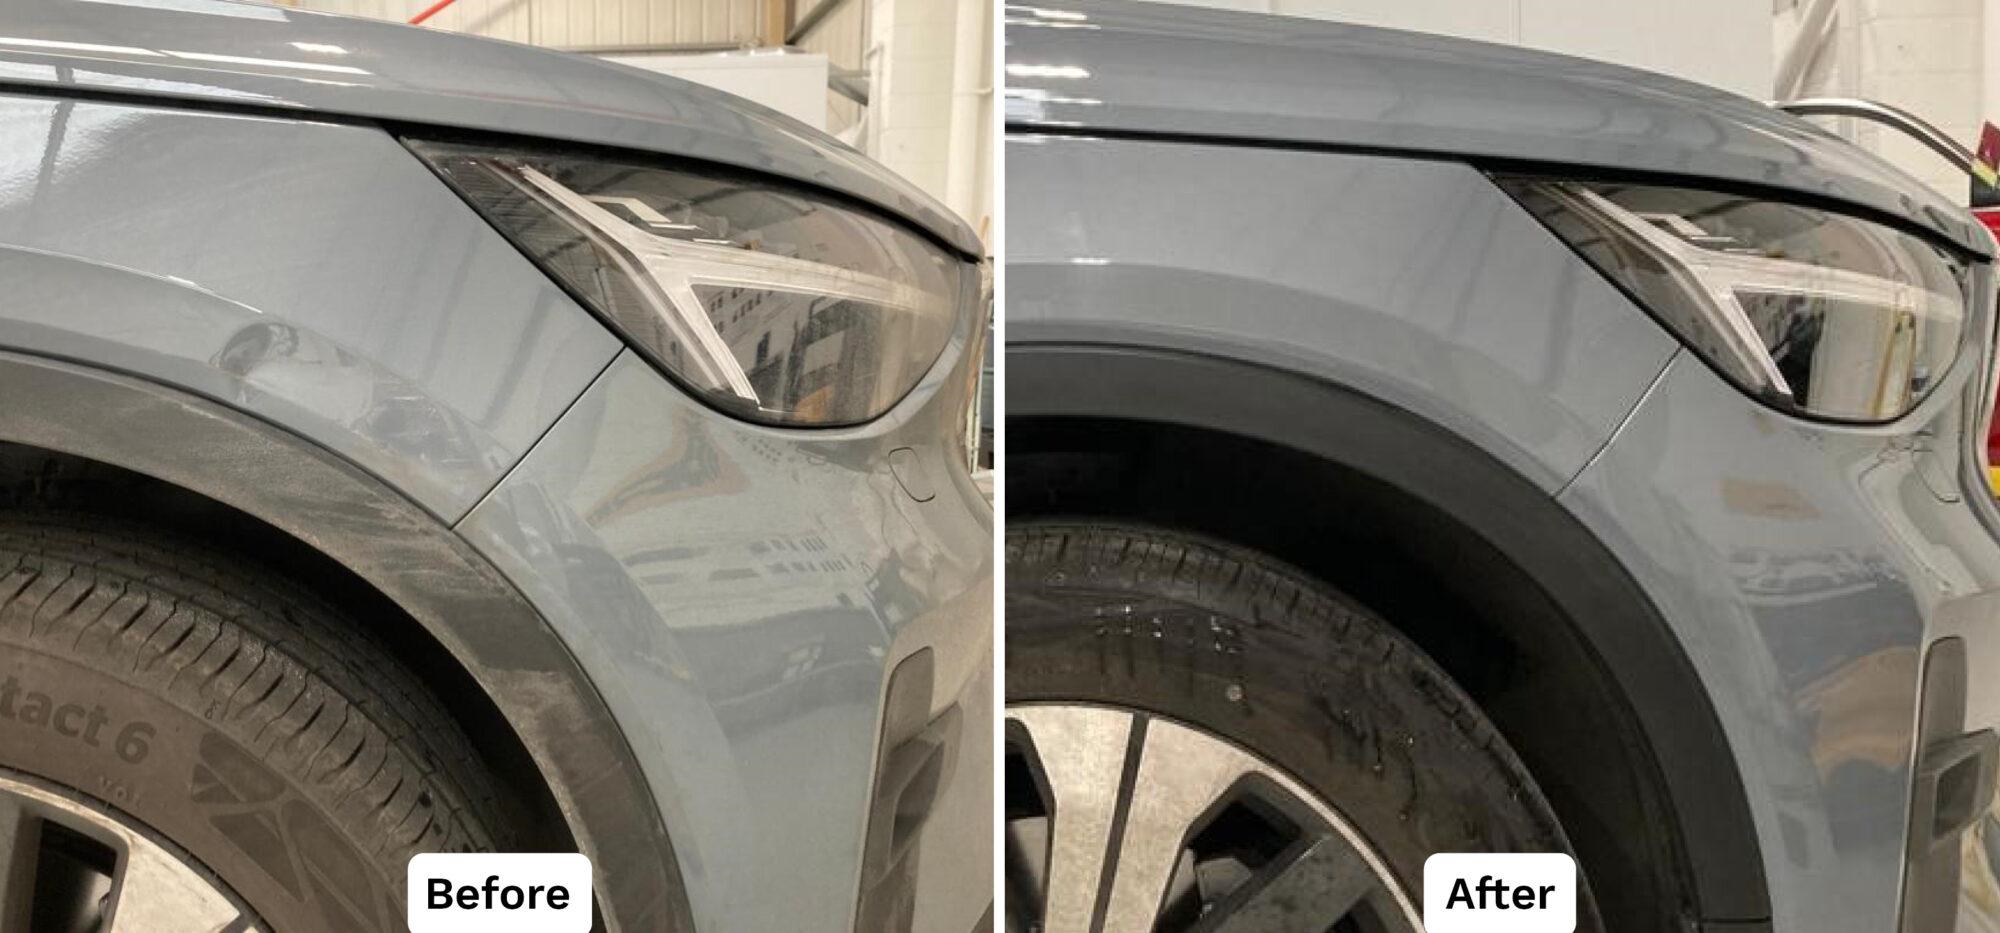 Preventing scratches on a new car paint scratch repairs